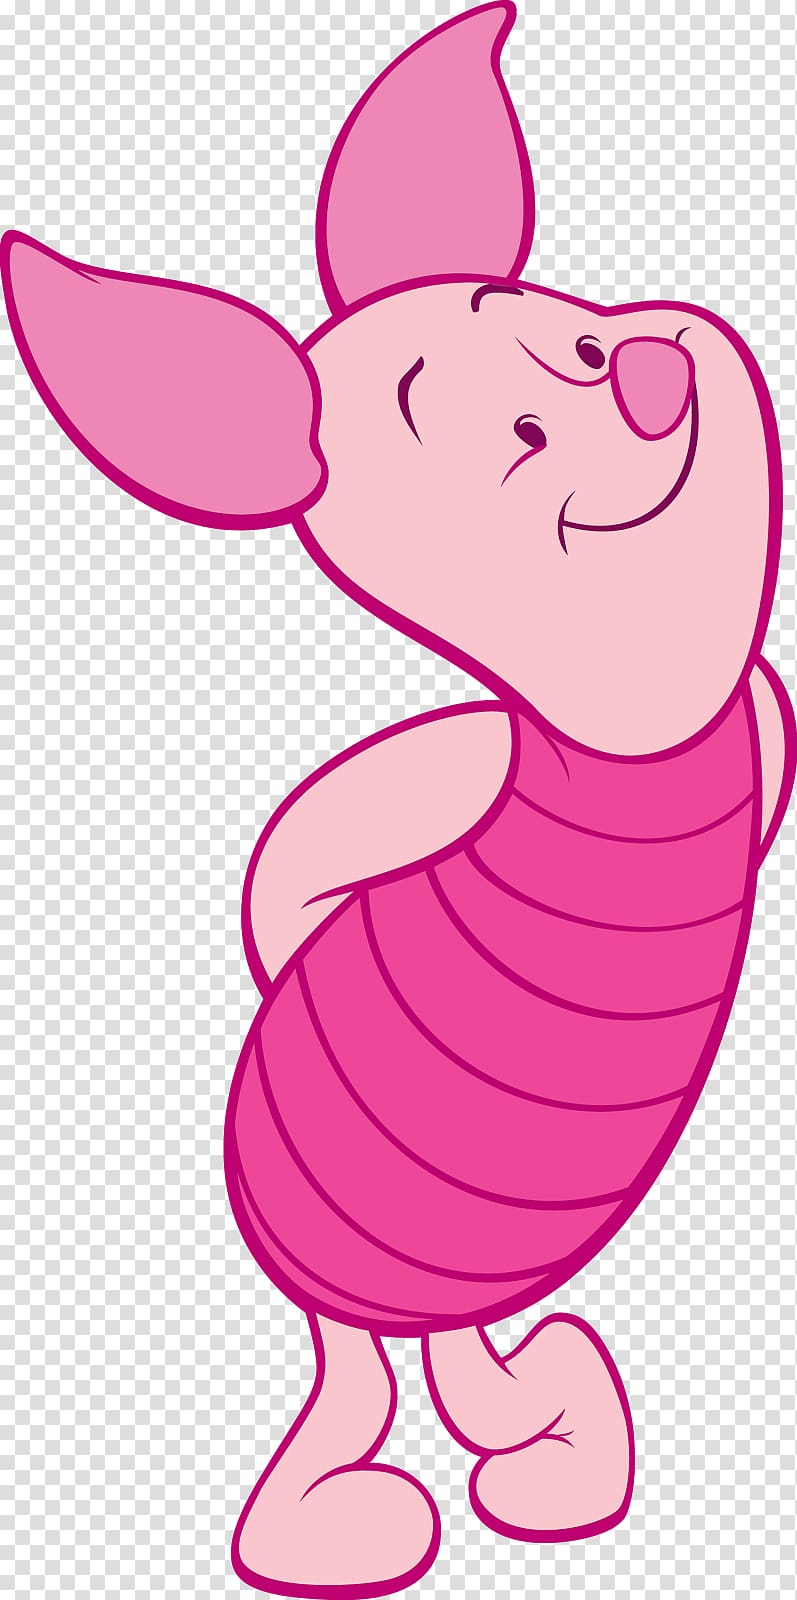 Piglet illustration, Piglet Winnie the Pooh Roo, winnie the pooh transparent background PNG clipart